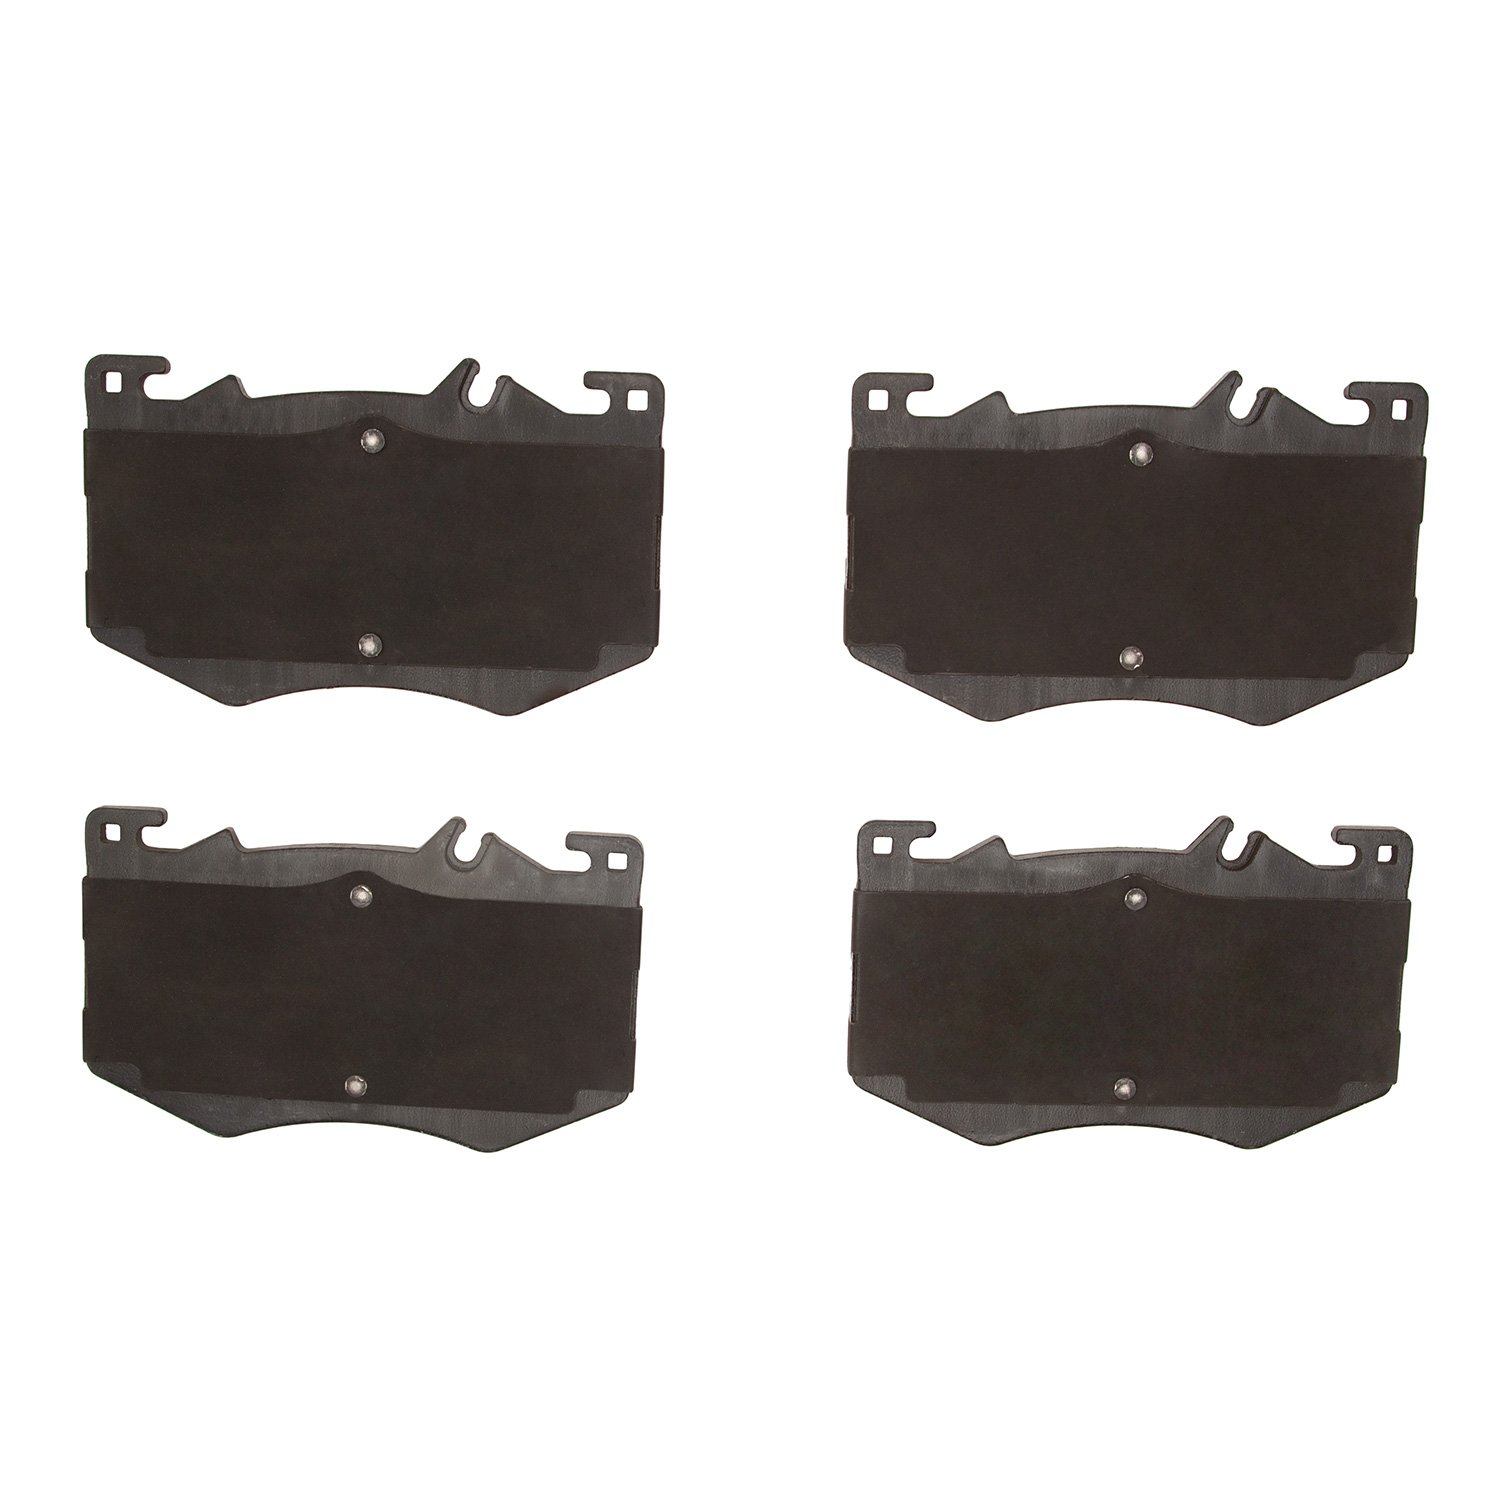 1551-2276-00 5000 Advanced Low-Metallic Brake Pads, Fits Select Mercedes-Benz, Position: Front